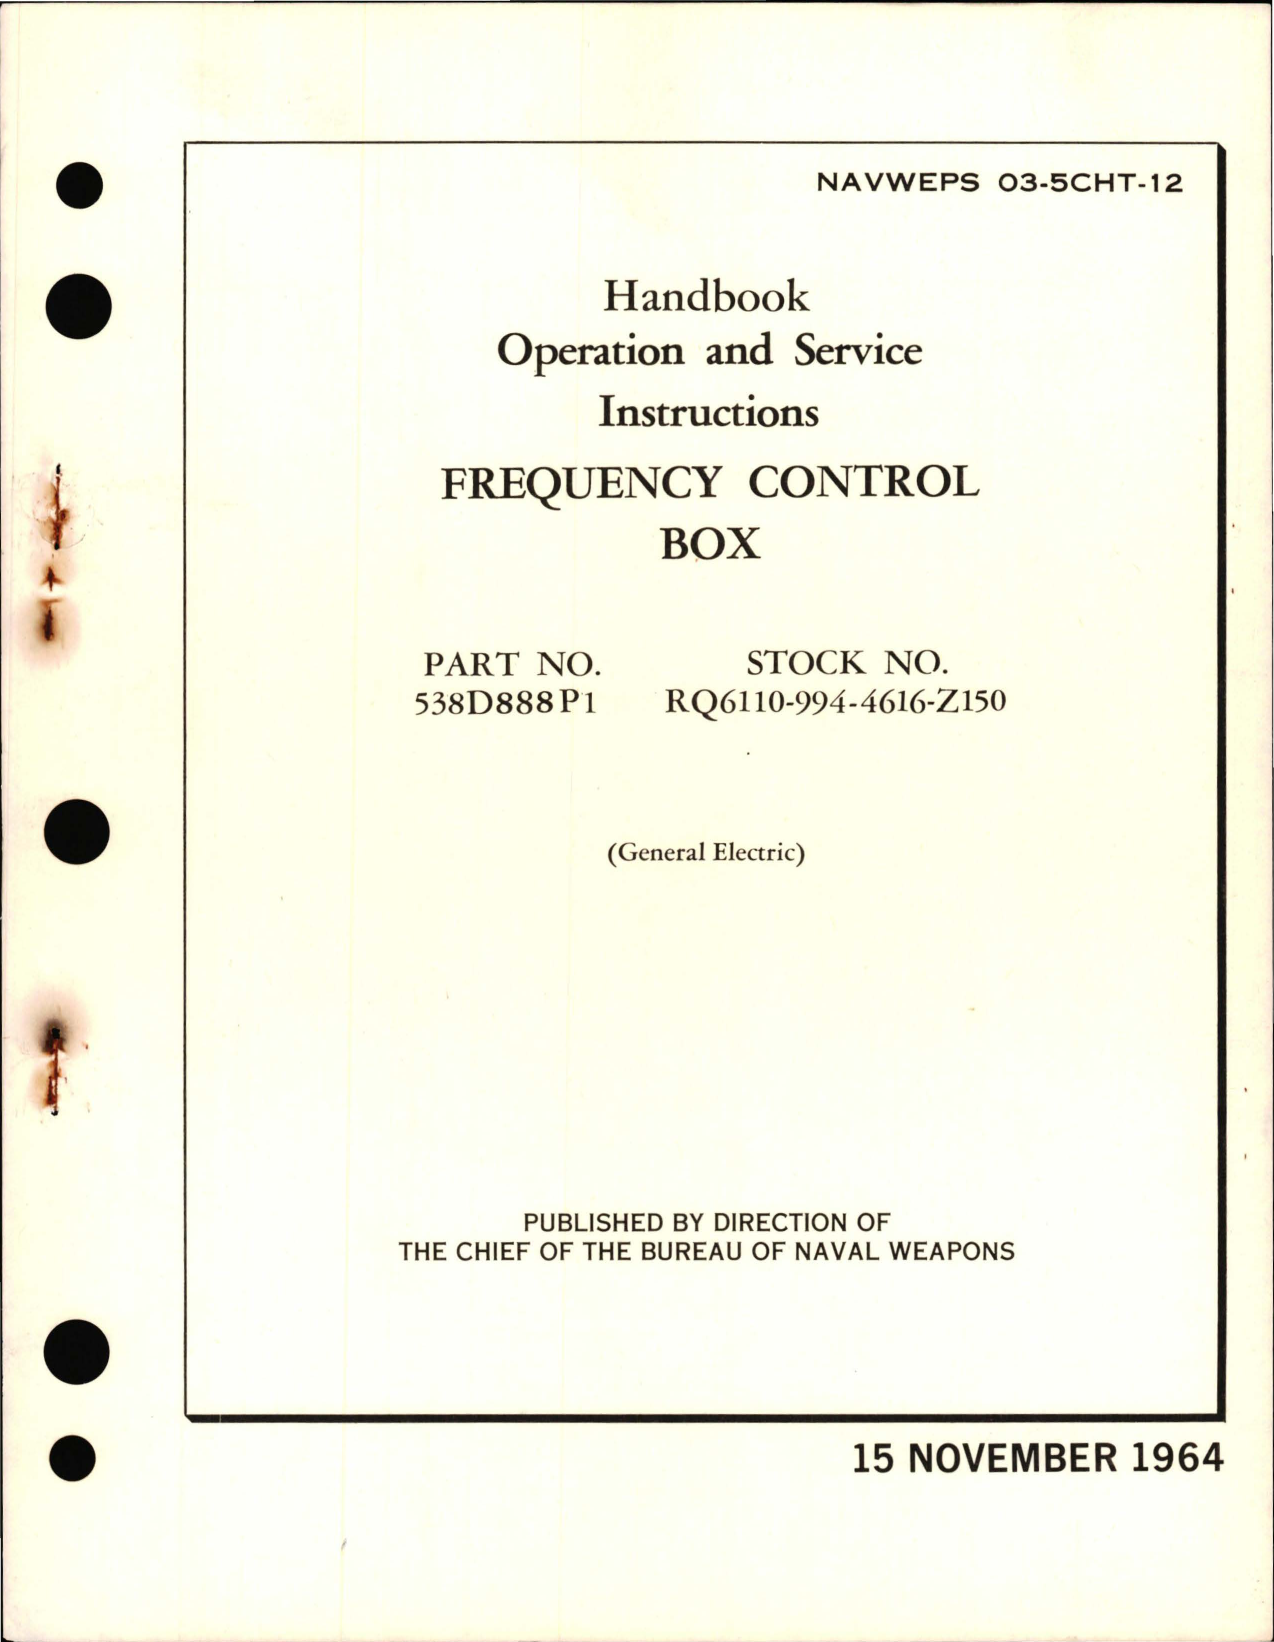 Sample page 1 from AirCorps Library document: Operation and Service Instructions for Frequency Control Box for 538D888P1